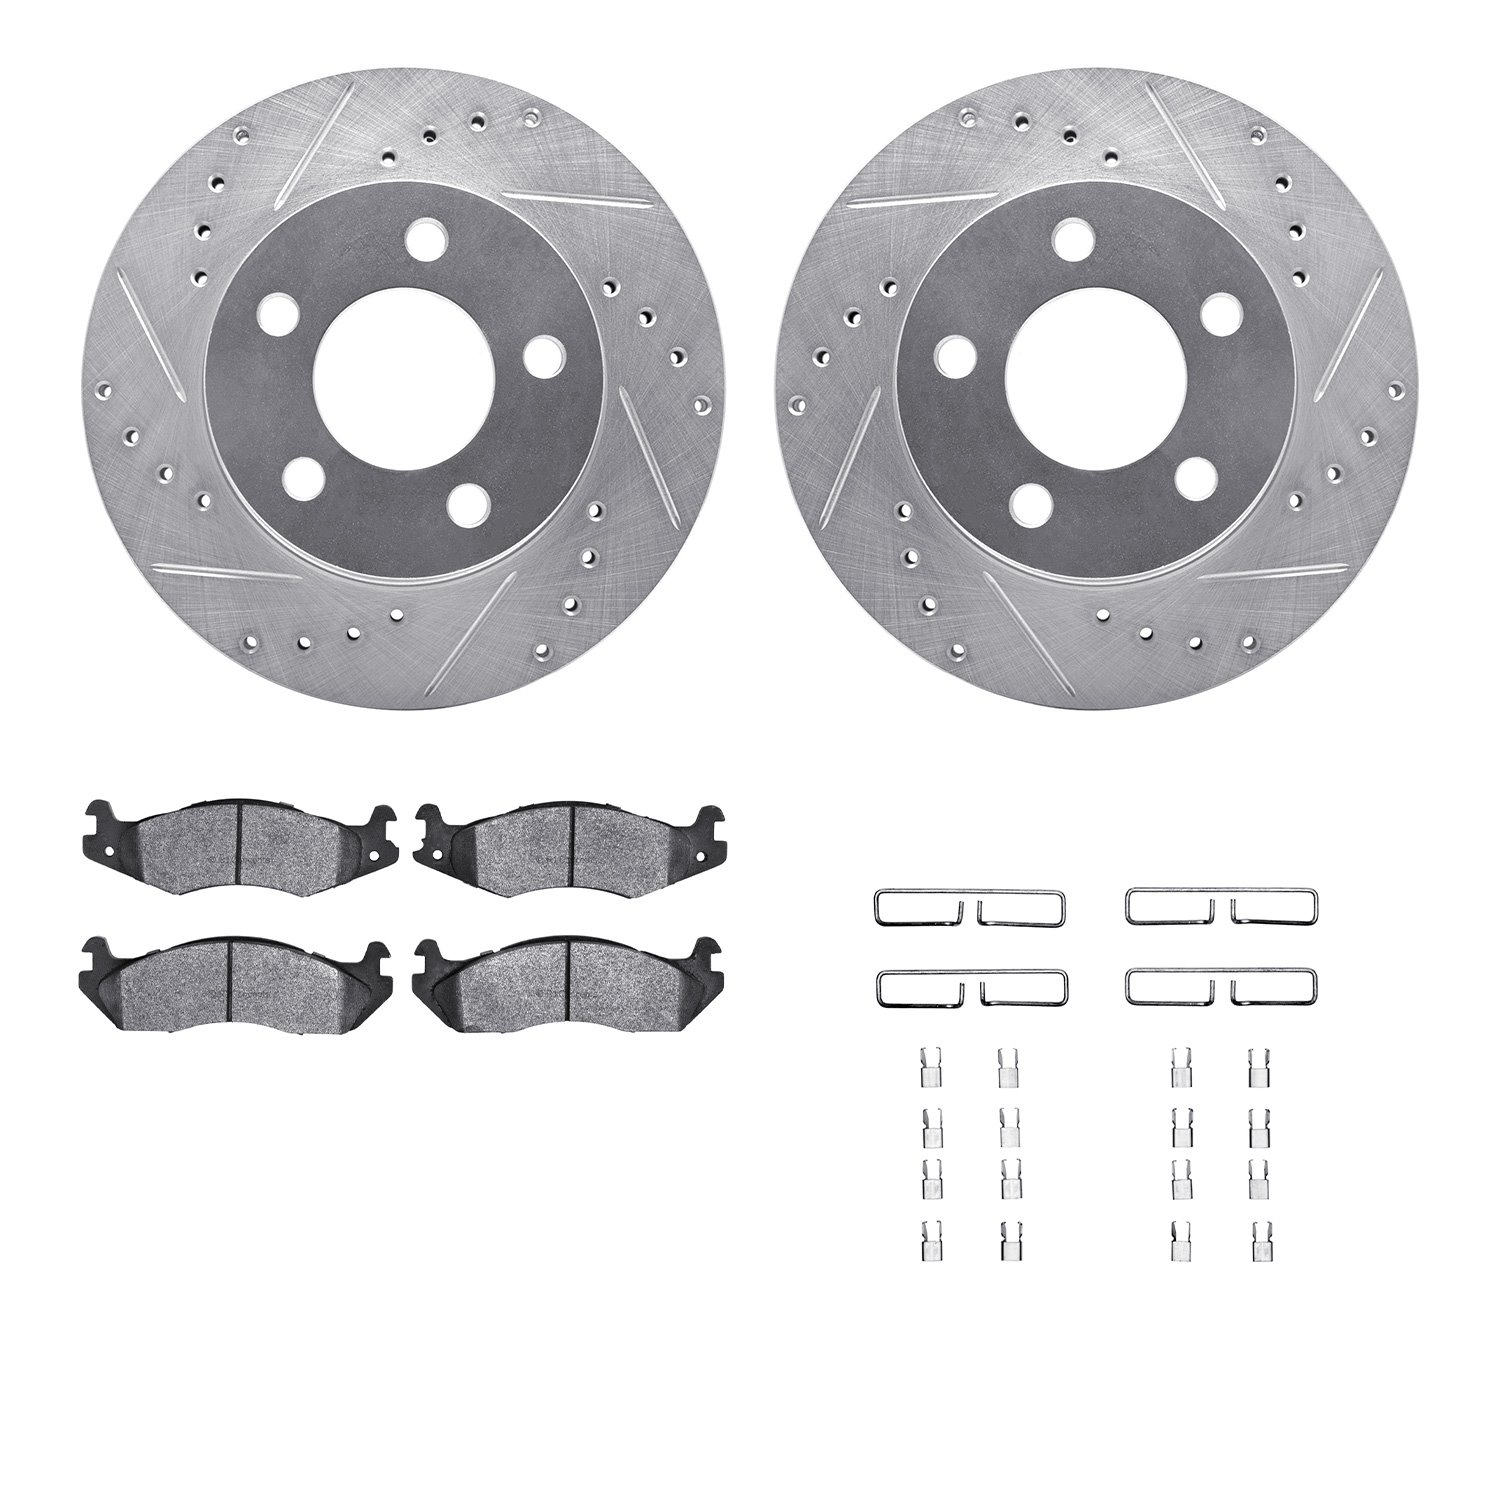 7412-42018 Drilled/Slotted Brake Rotors with Ultimate-Duty Brake Pads Kit & Hardware [Silver], 1982-1989 Multiple Makes/Models,